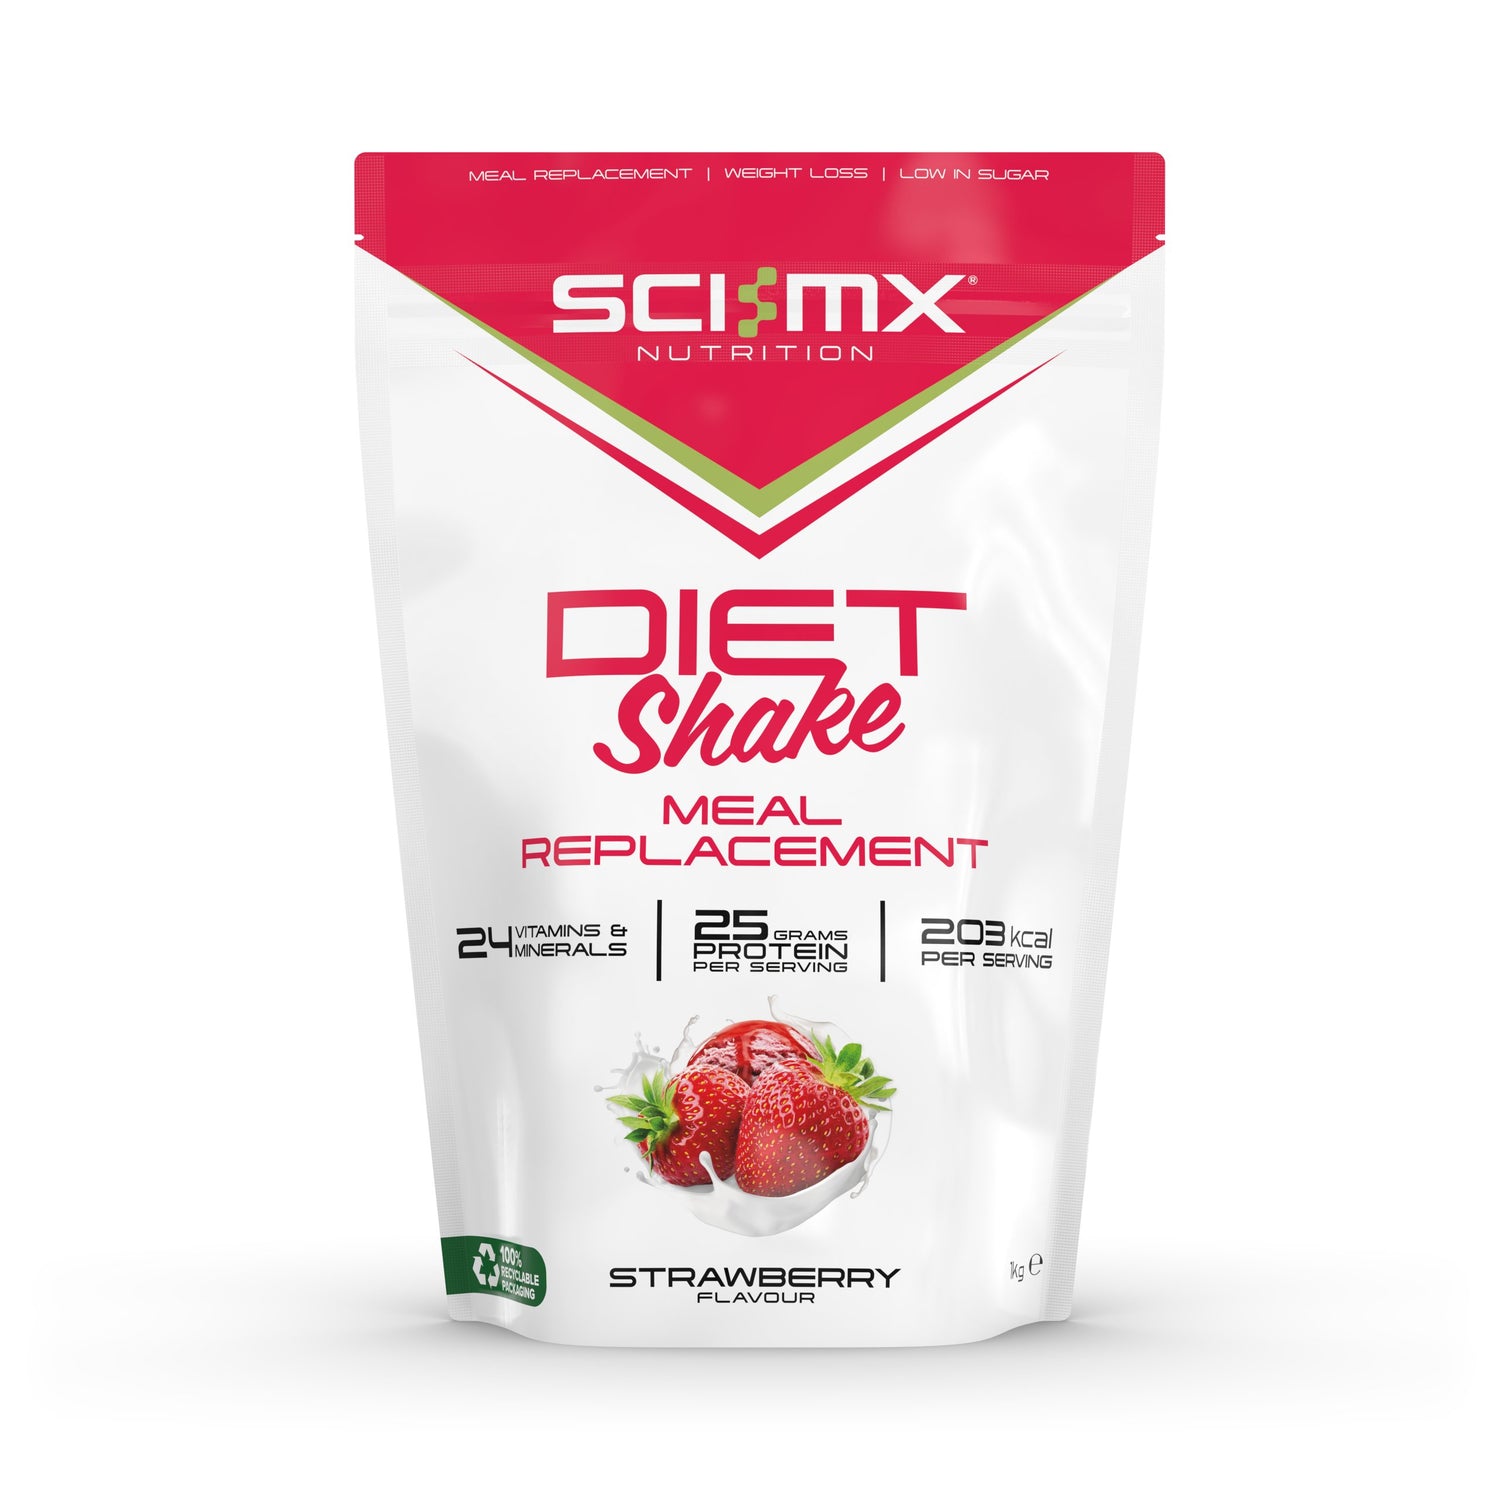 Sci-MX Diet Meal Replacement - 3 flavours to choose from - theskinnyfoodco